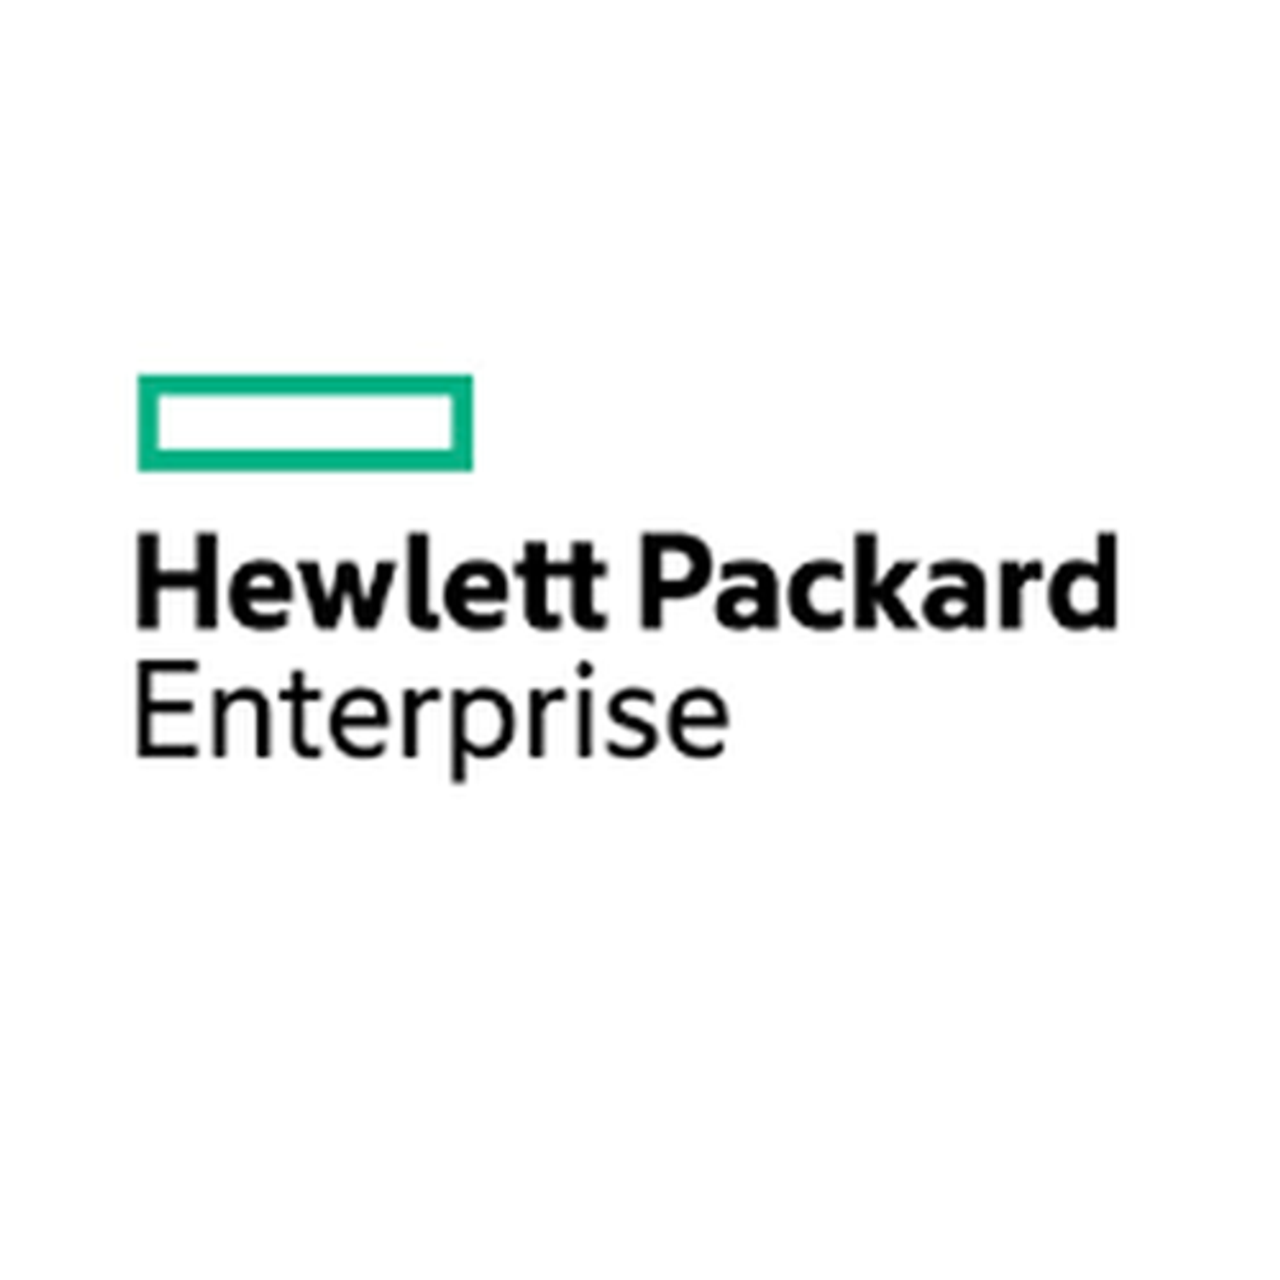 HPE C13/C14 WW 10A 3m Blk Lckng Reman PC (Sourcing) - HPE Discontinued Product)